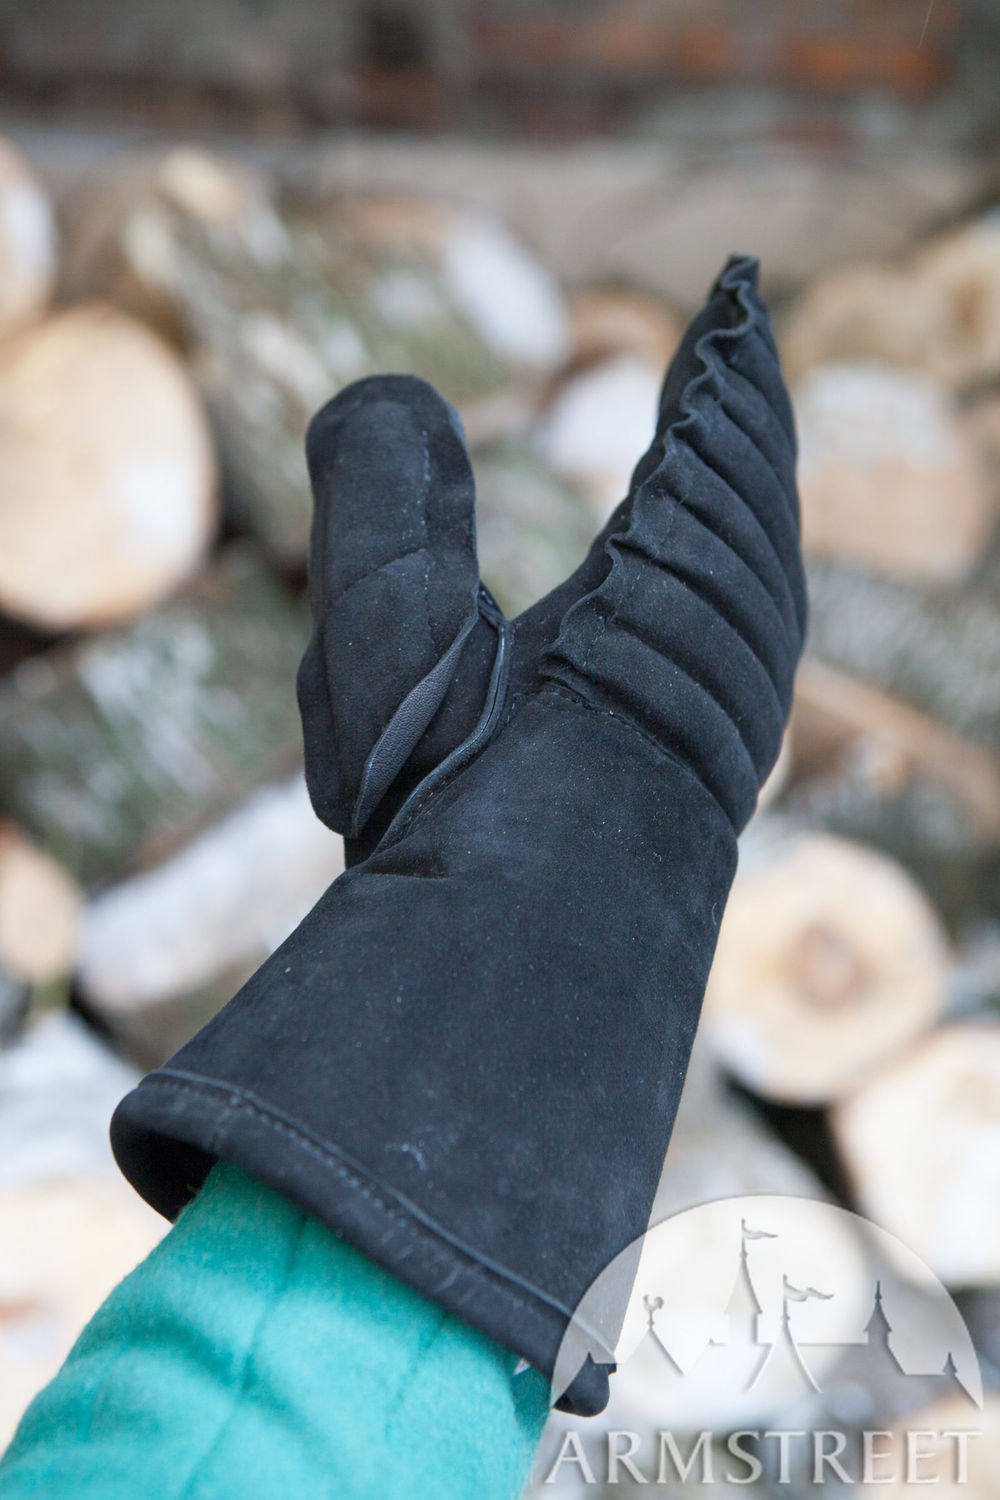 Padded Medieval Mittens Gloves by ArmStreet